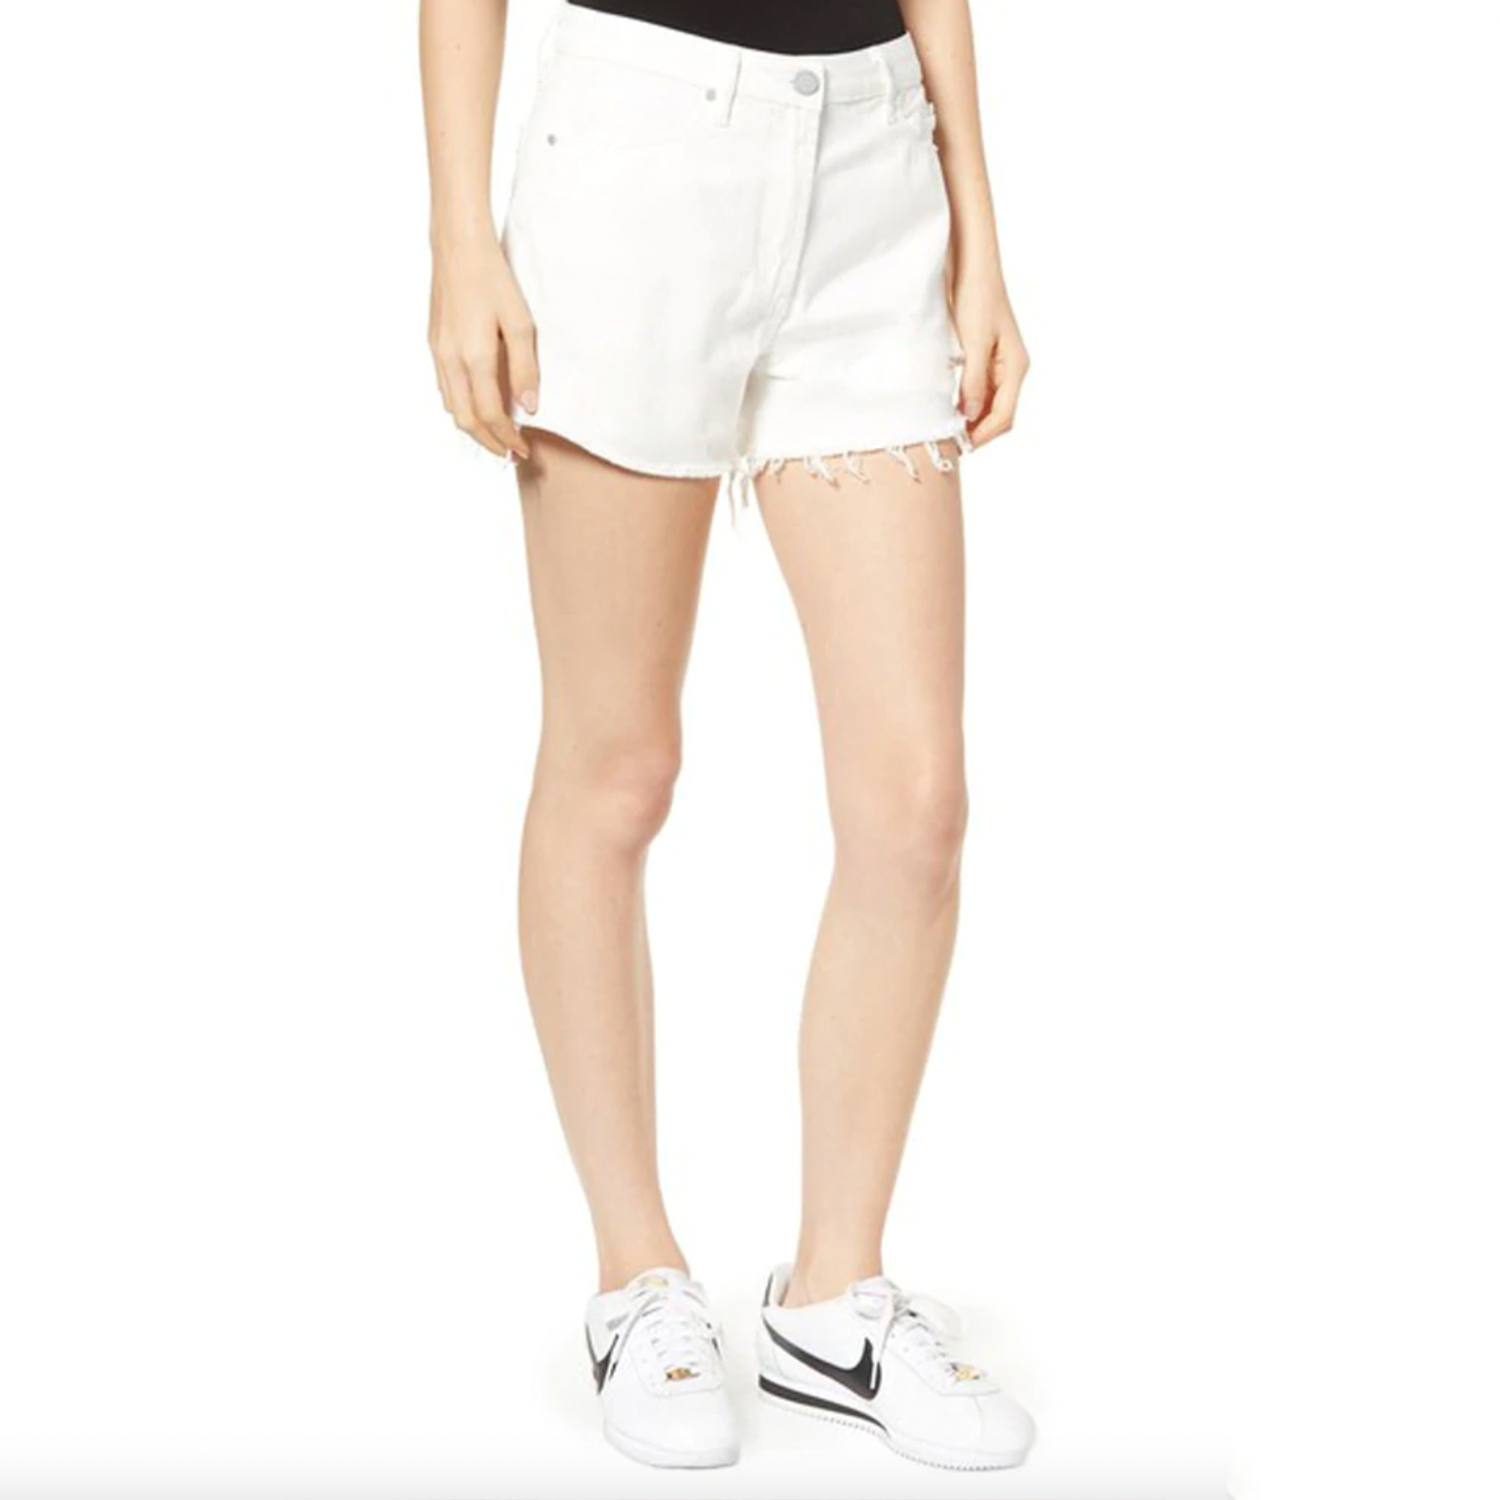 Articles of Society Meredith Short. Providing the perfect amount of comfort with a style that you crave, these frayed shorts are ready to take you to that country music festival or to the beach with stylish looks wherever you go